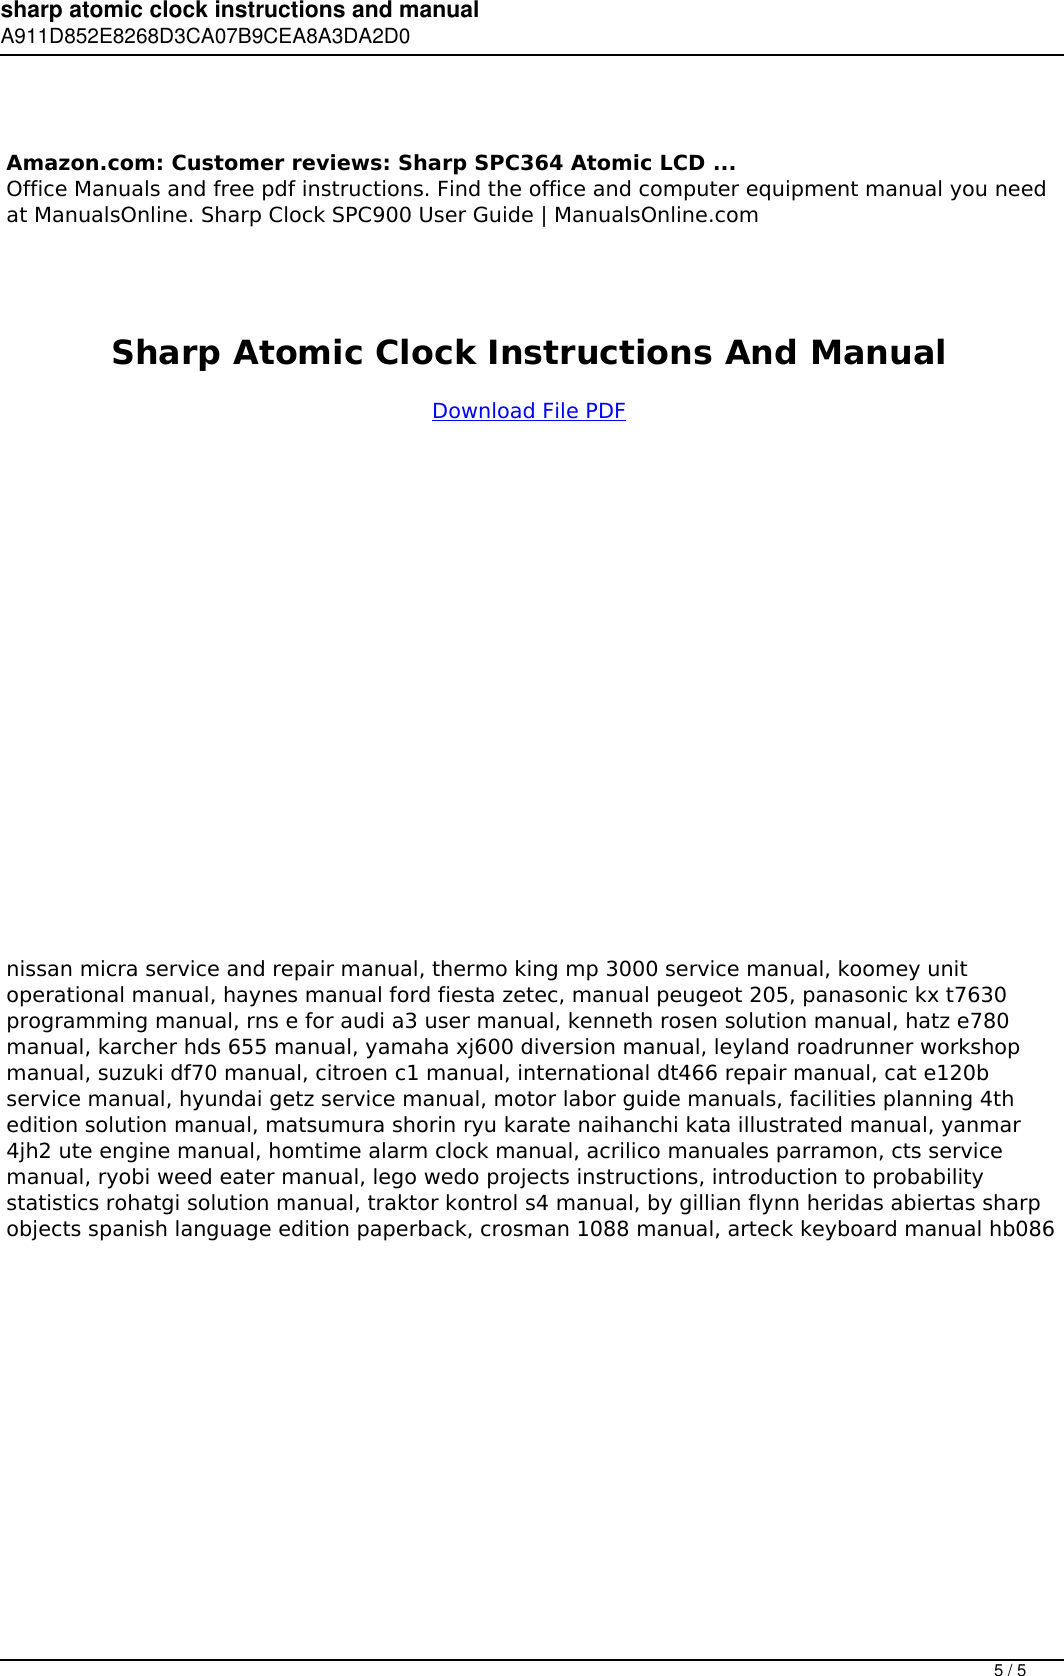 Page 5 of 5 - Sharp Atomic Clock Instructions And Manual